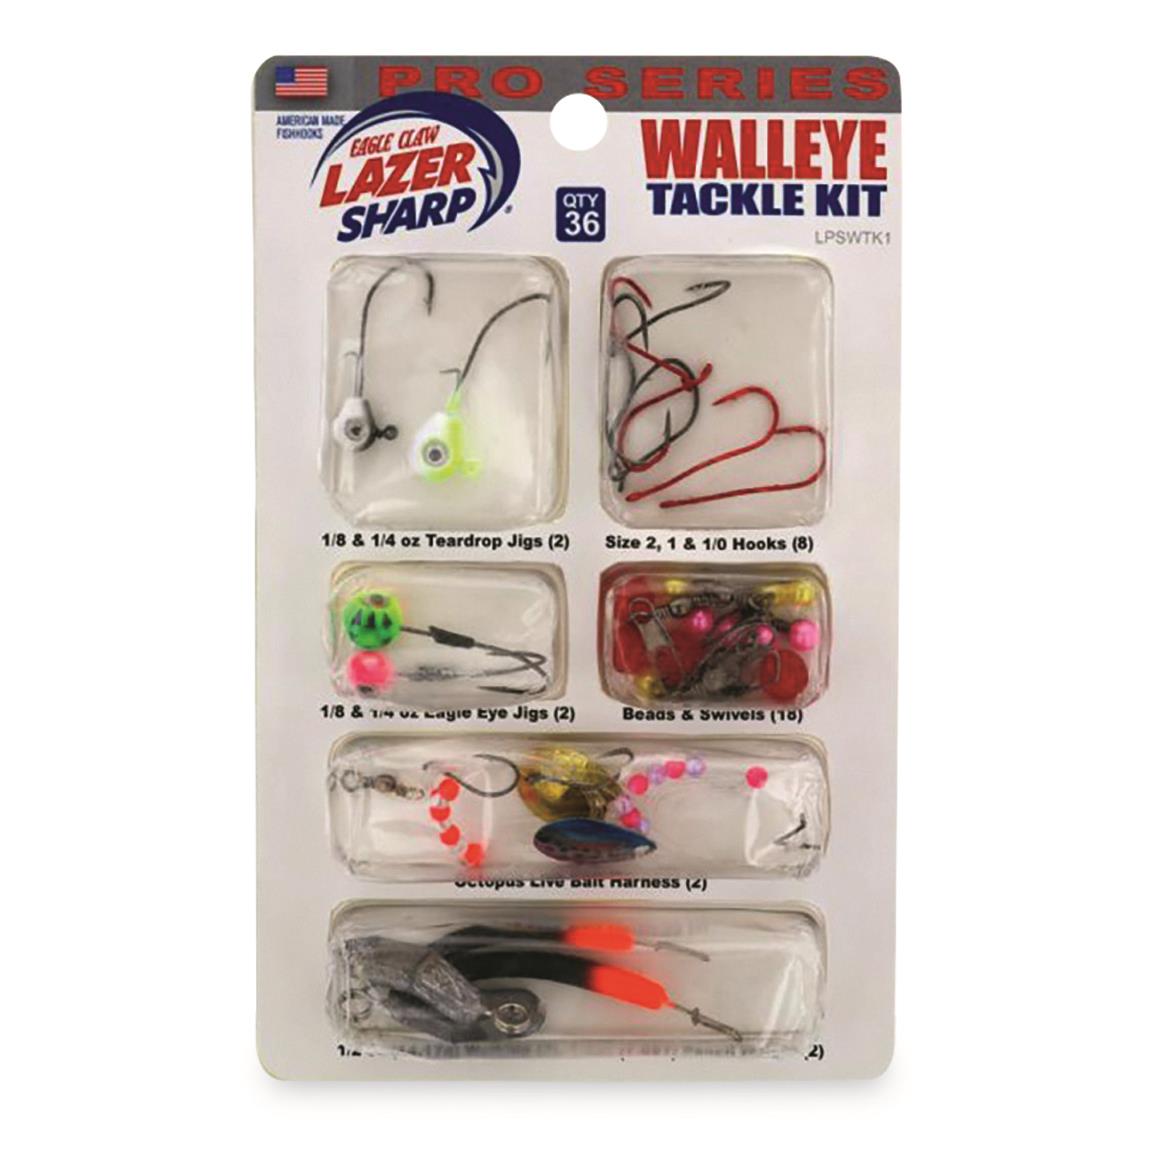 Eagle Claw Lazer Sharp Walleye Tackle Kit, 36 Pieces - 734323, Tackle Kits  at Sportsman's Guide